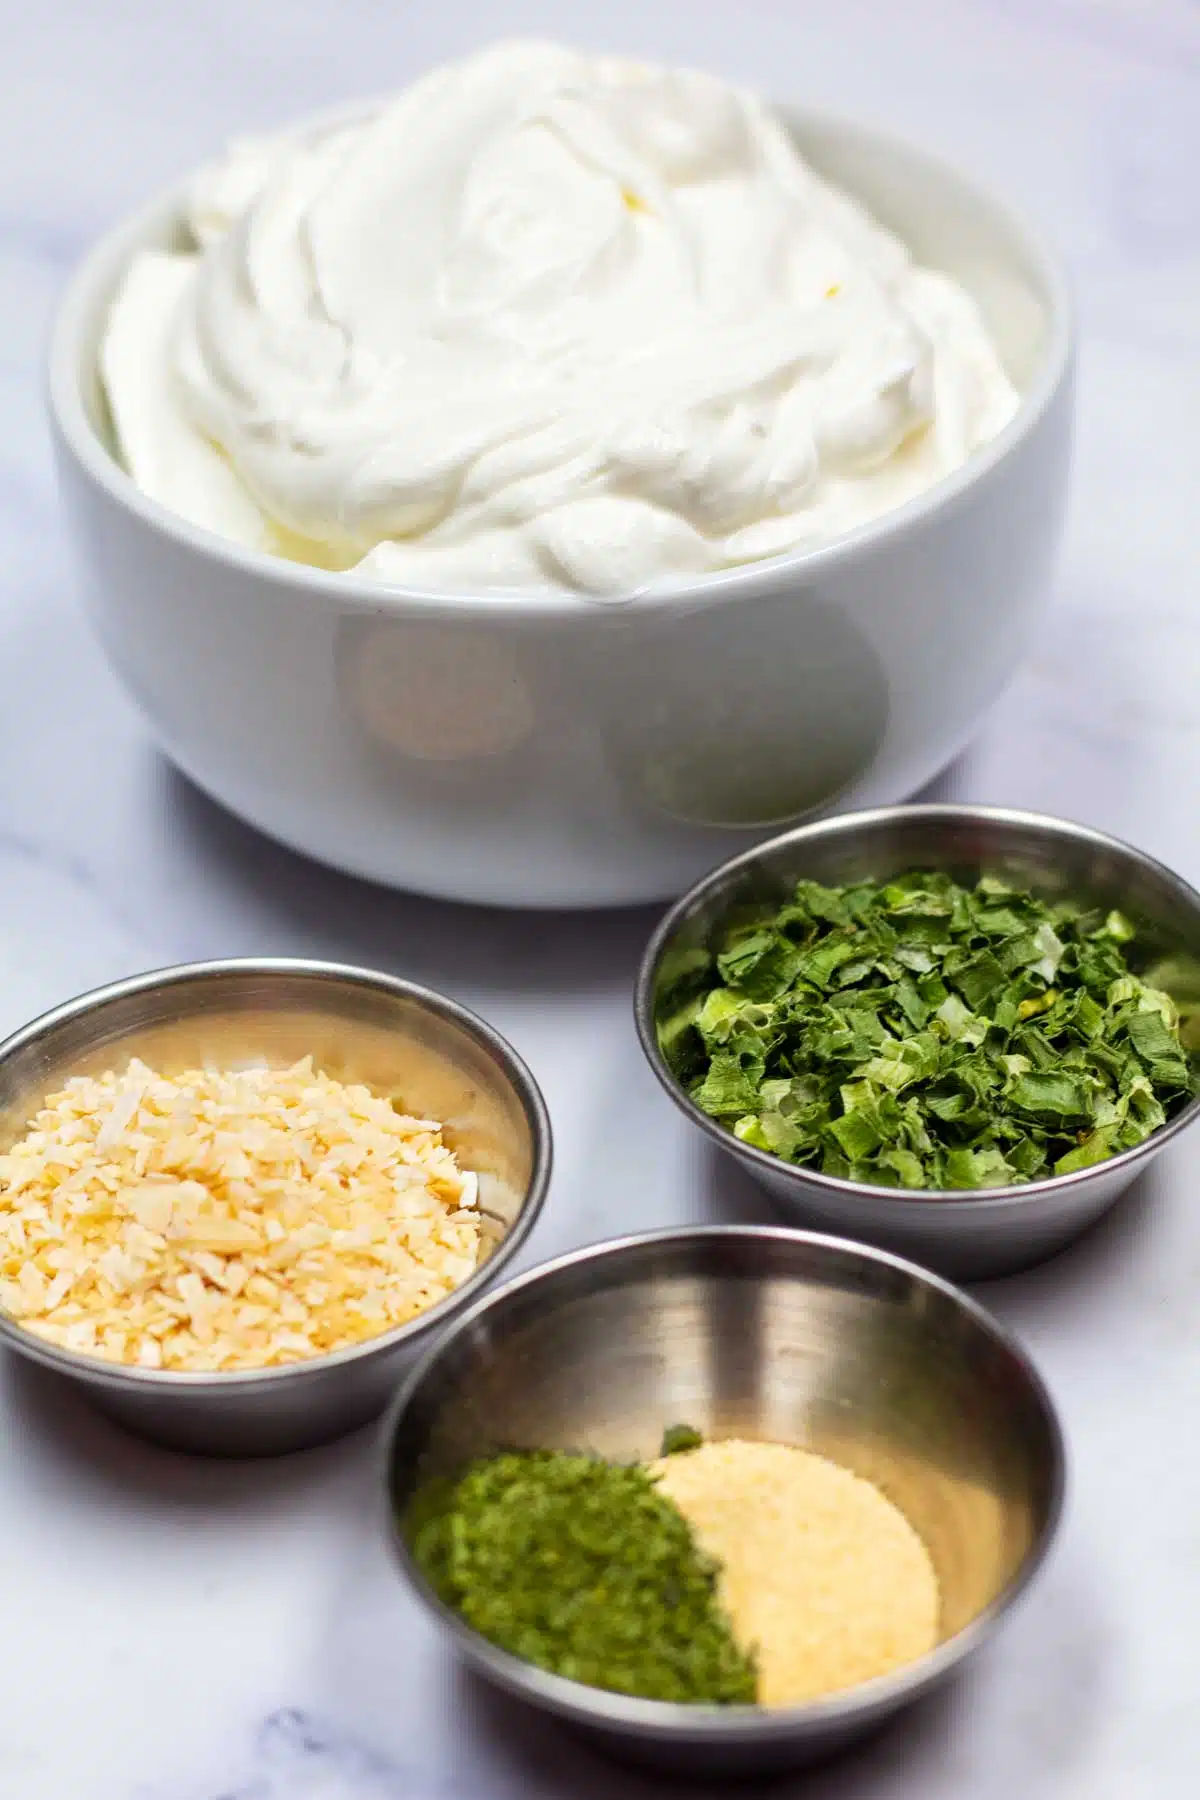 Tall image of ingredients needed for sour cream chip dip.